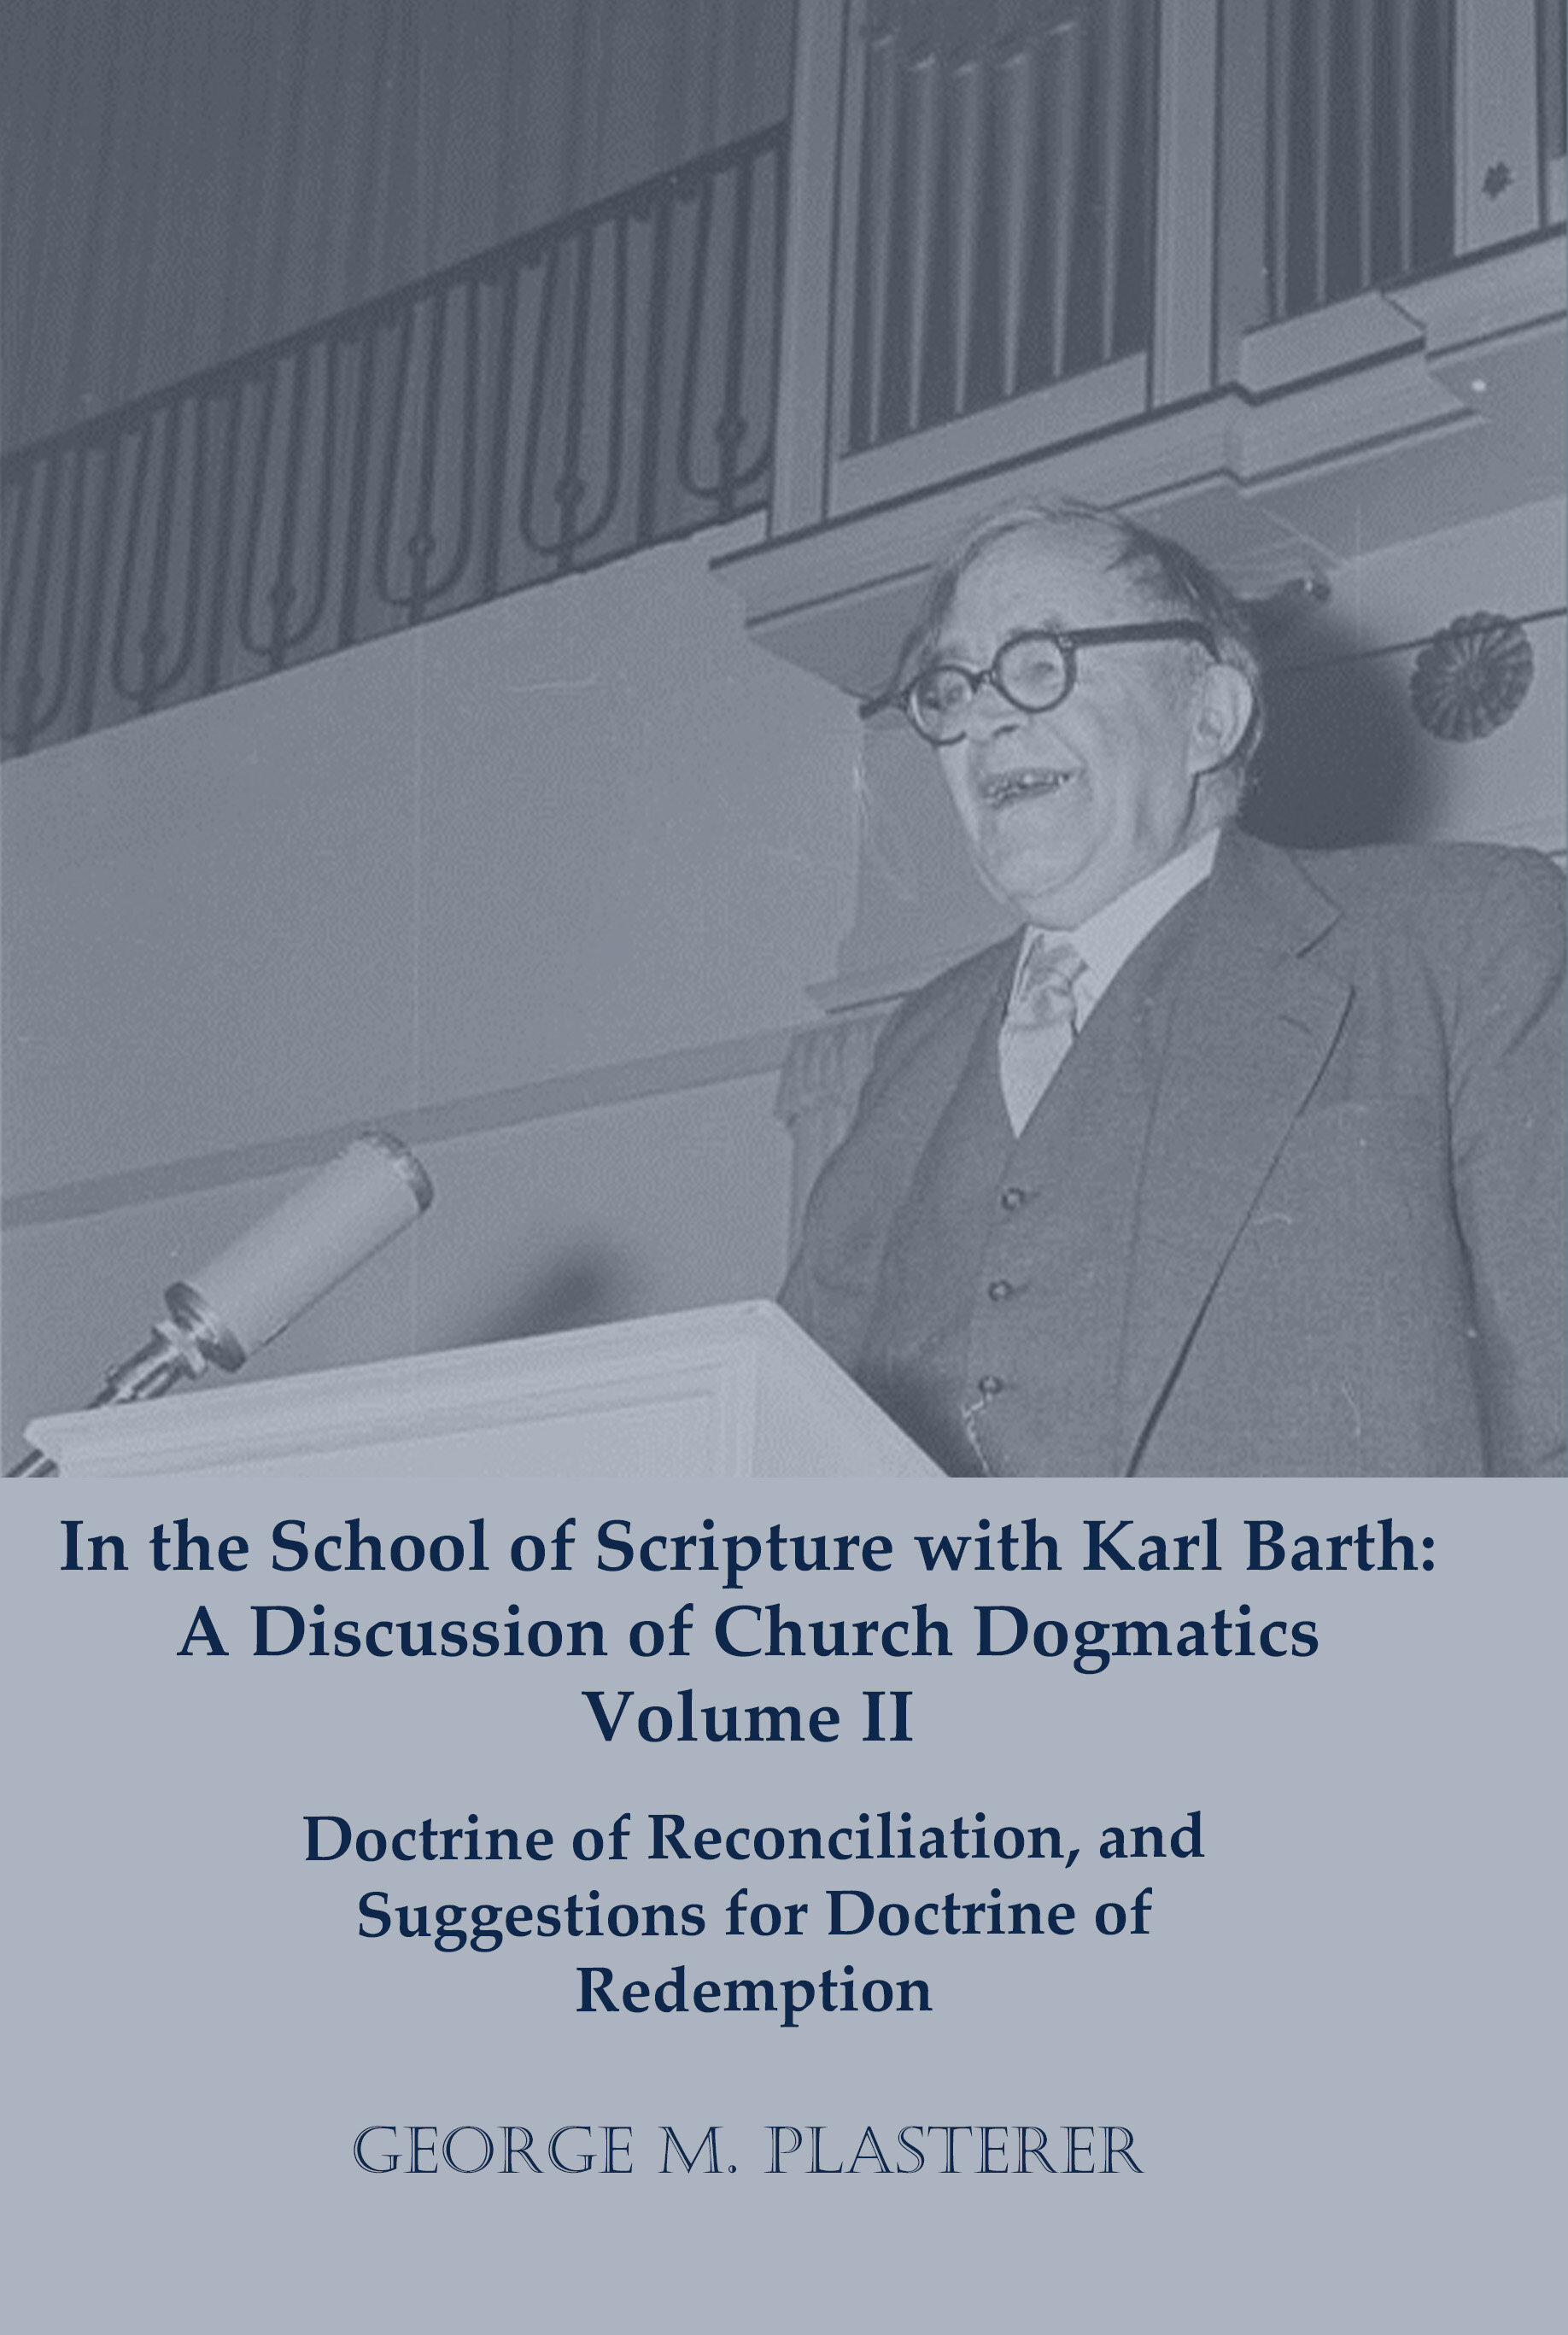 In the School of Scripture with Karl Barth: A Discussion of Church Dogmatics VOLUME II